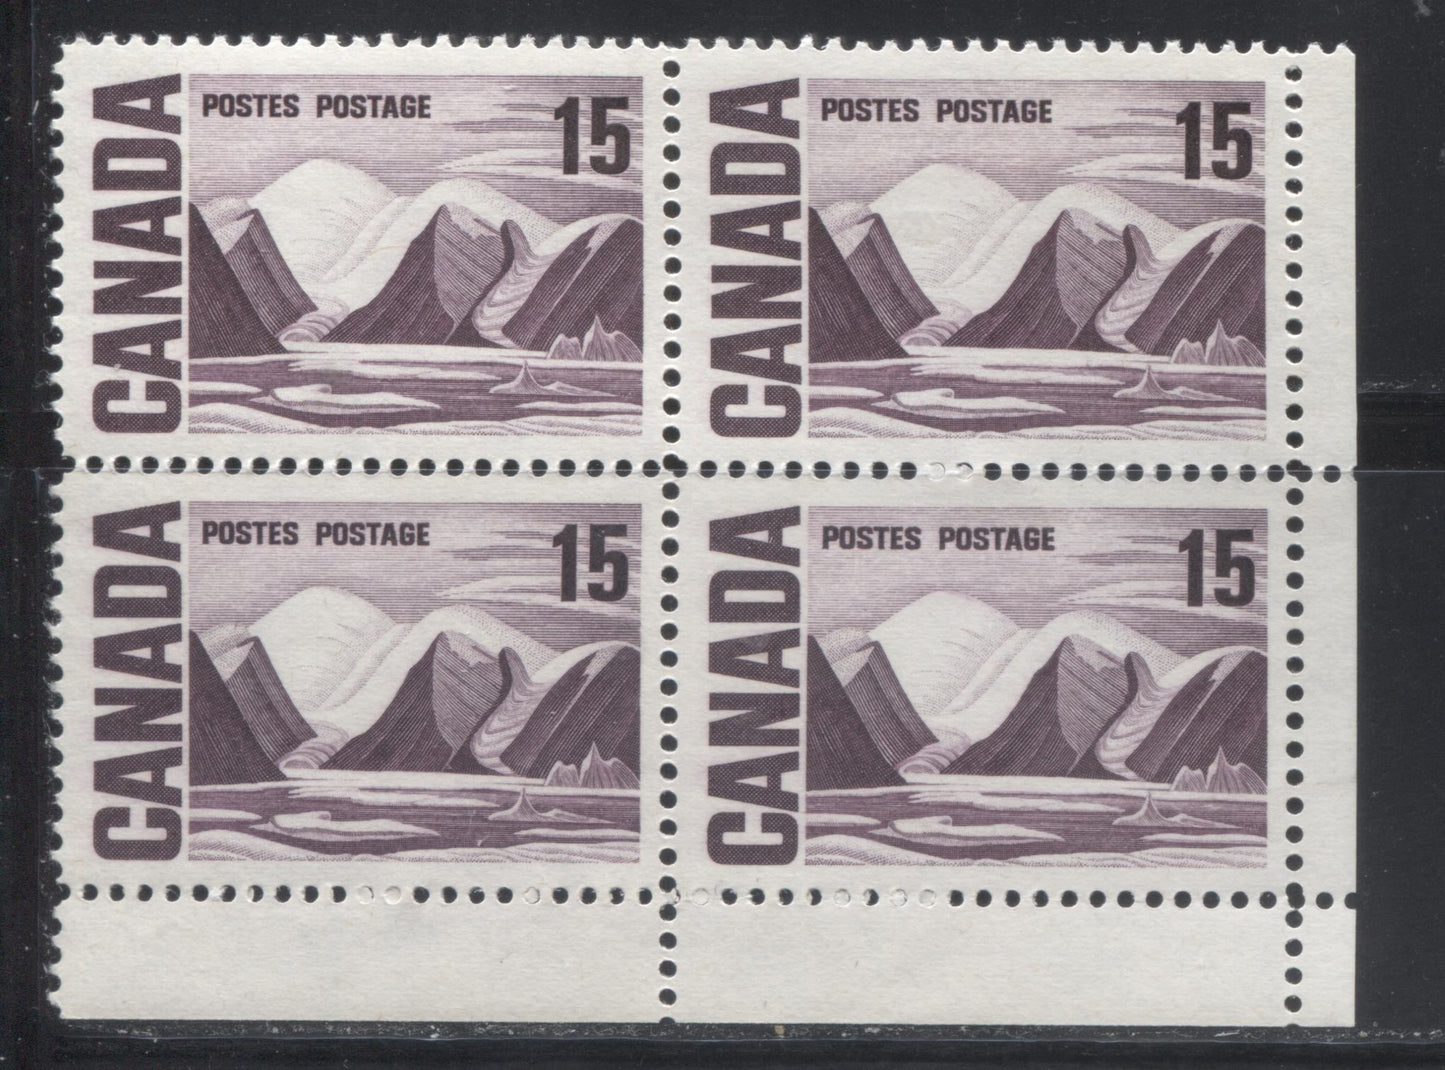 Lot 31 Canada #463v 15c Bright Reddish Lilac Greenland Mountains, 1967-1973 Centennial Definitive Issue, A VFNH LR Field Stock Block Of 4 On LF-fl Horizontal Wove Paper With Satin PVA Gum